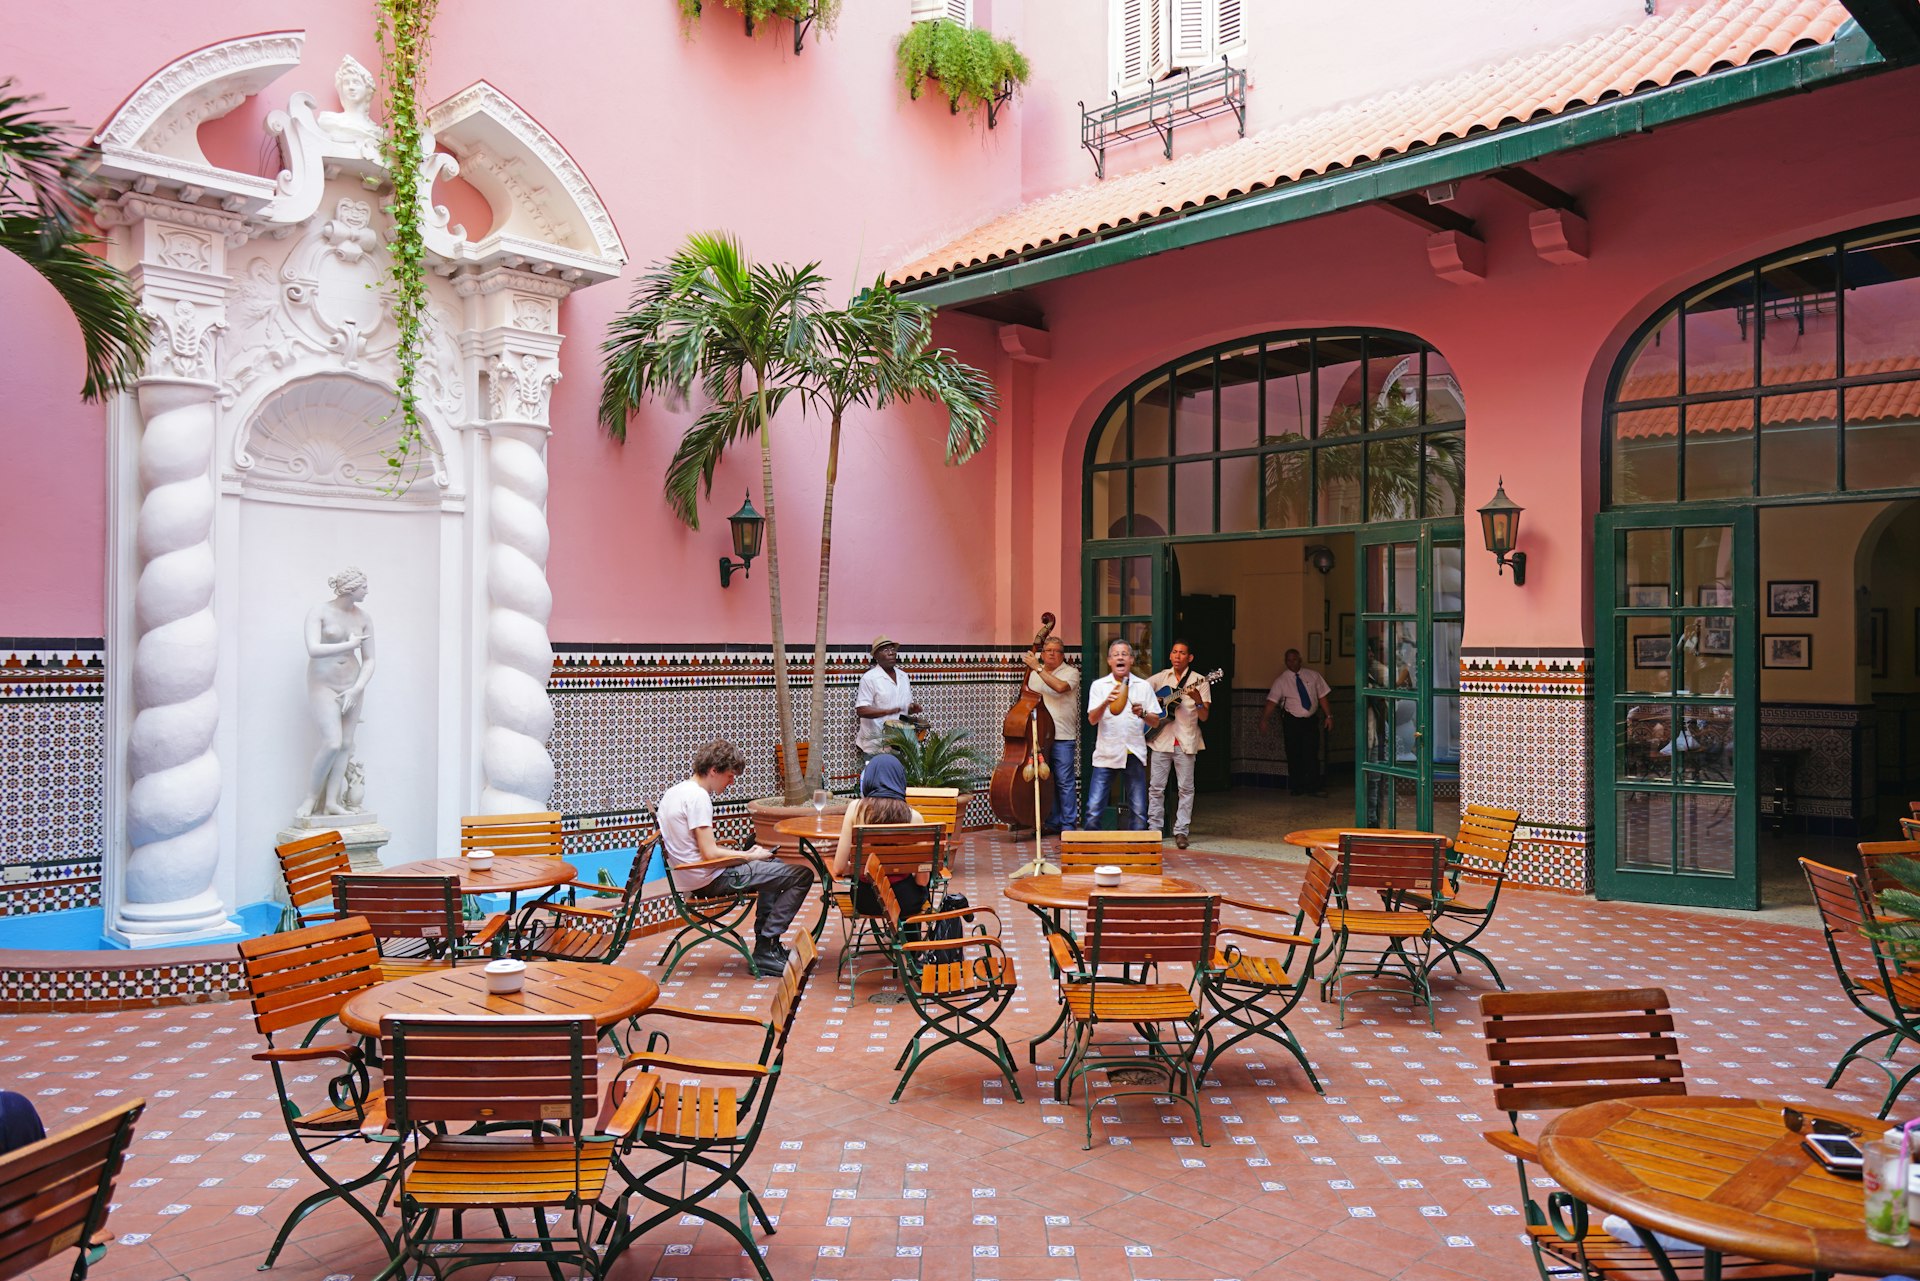 Musicians perform in the corner of a courtyard of the landmark historic Hotel Sevilla Havana, which is painted in bright pink with a couple of onlookers sat at tables looking on